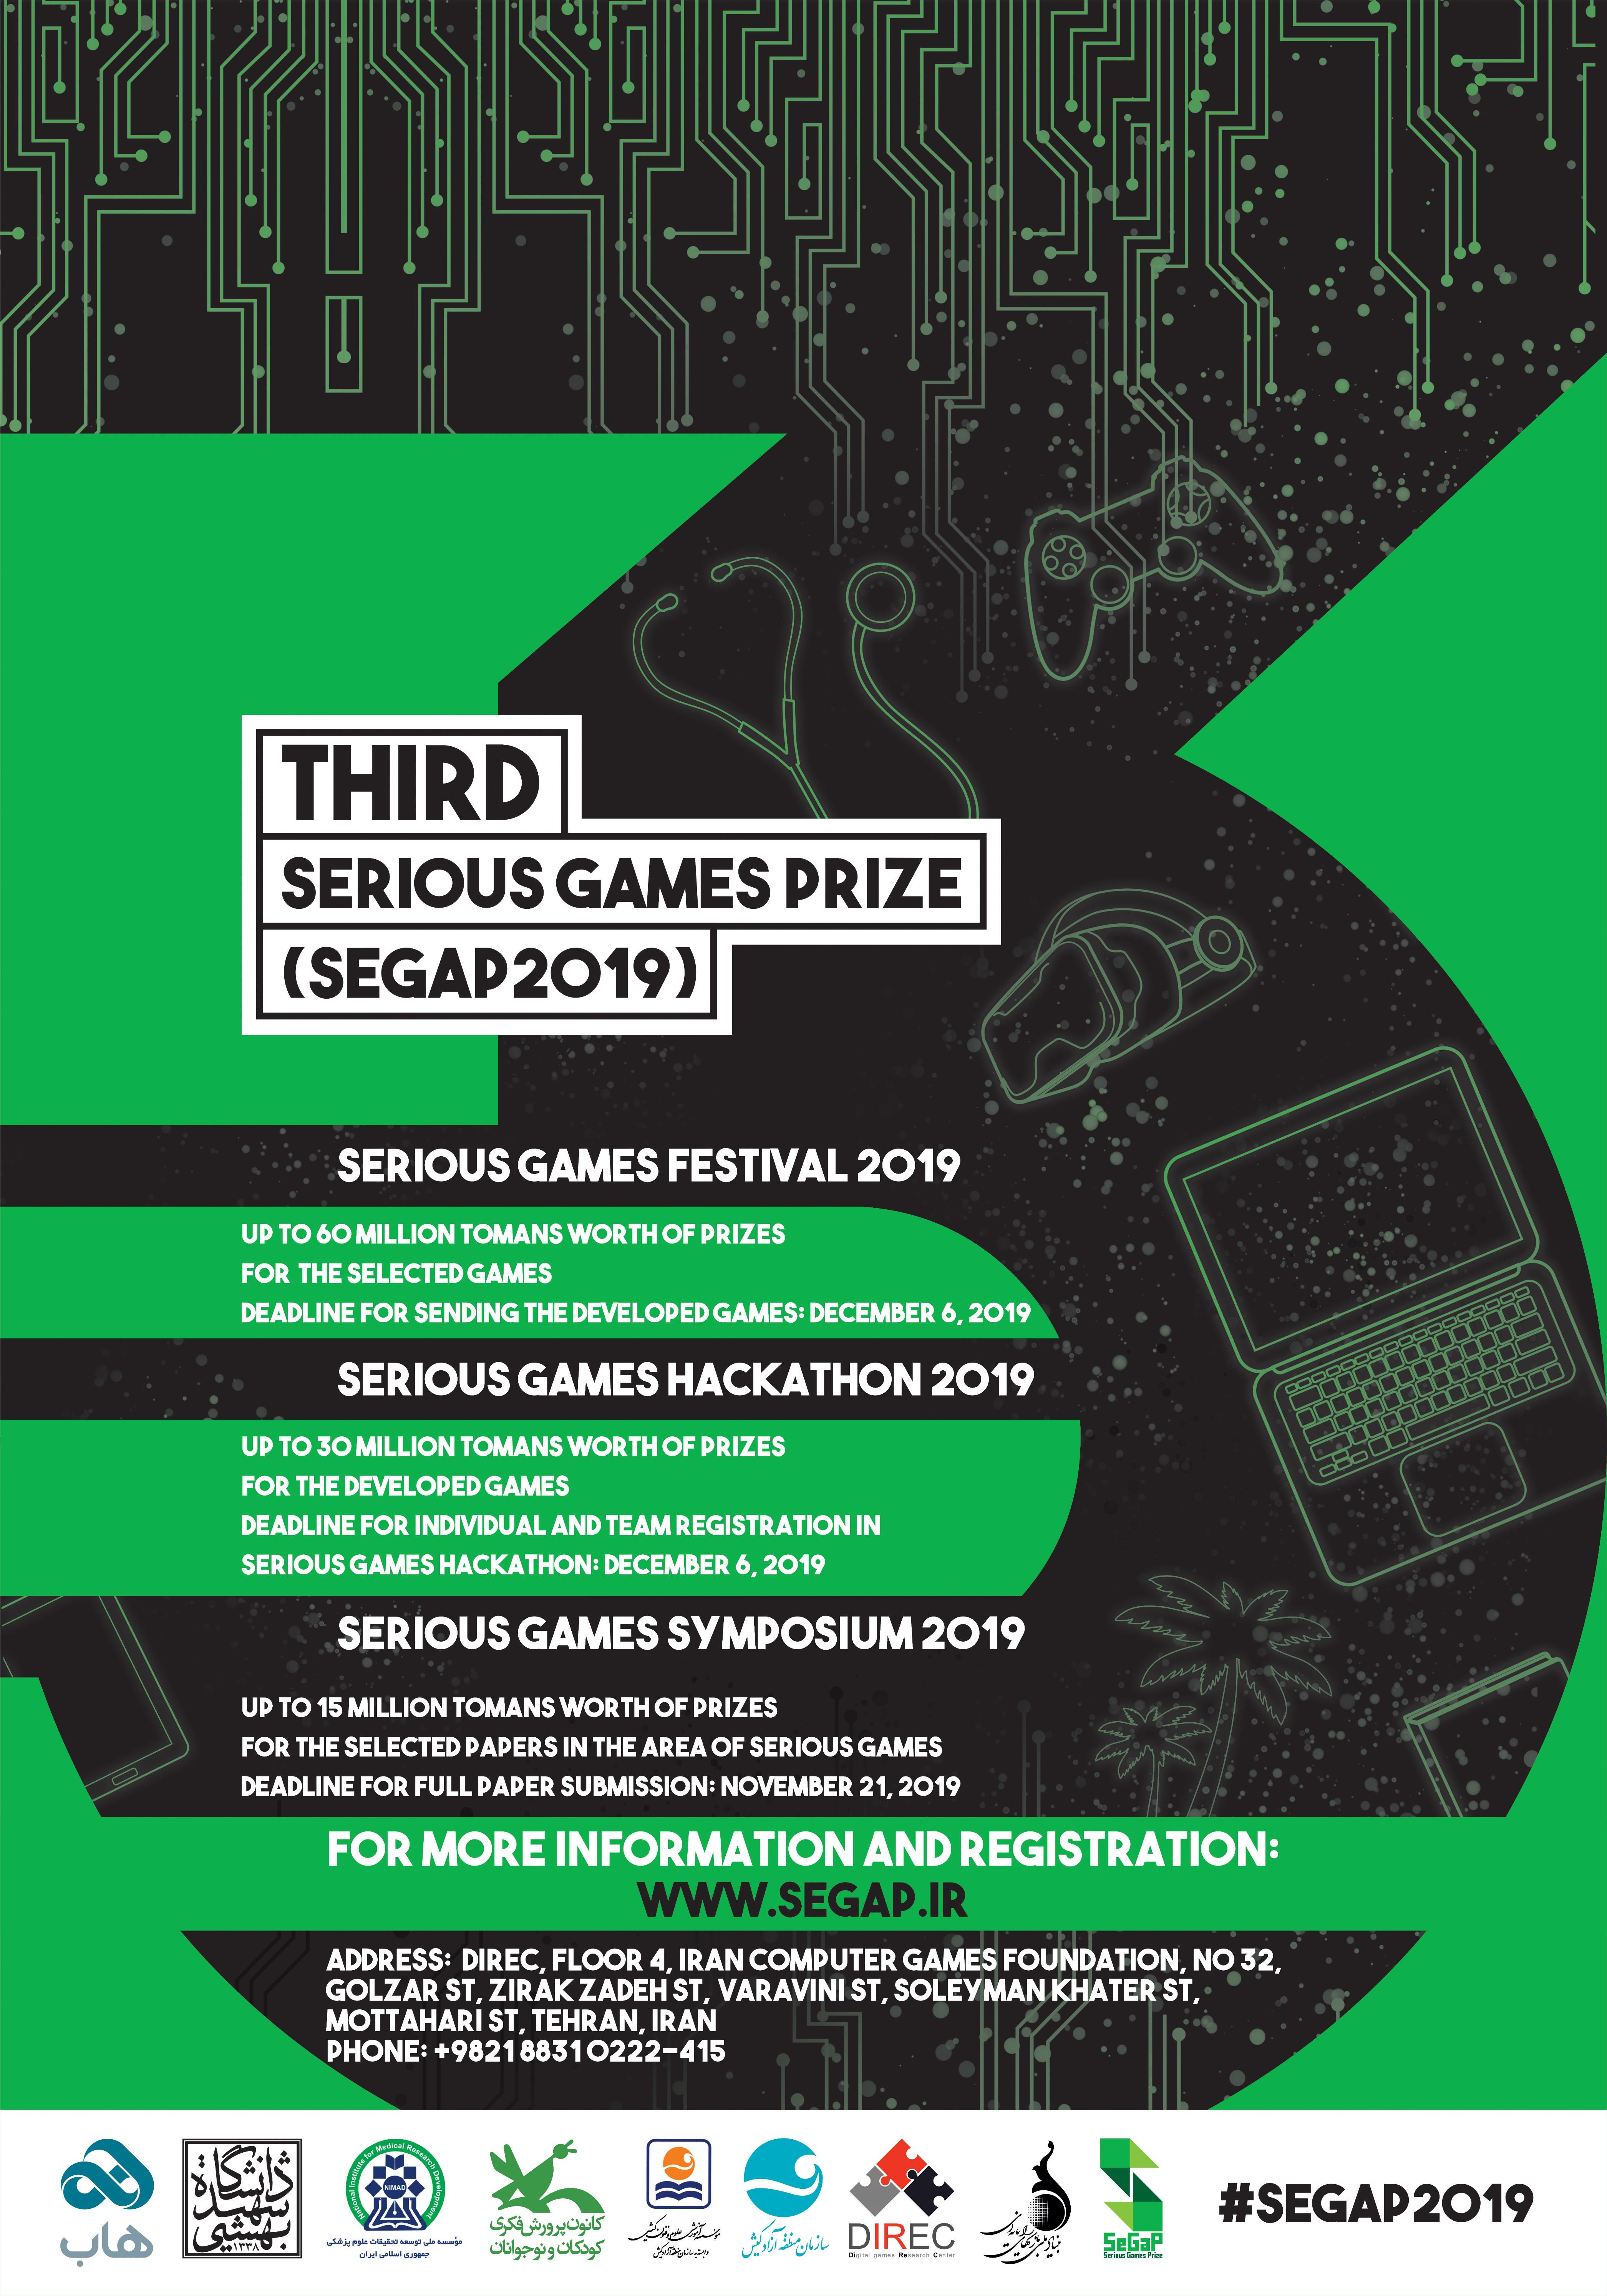 Release of third Serious Games Prize (SeGaP)2019 call